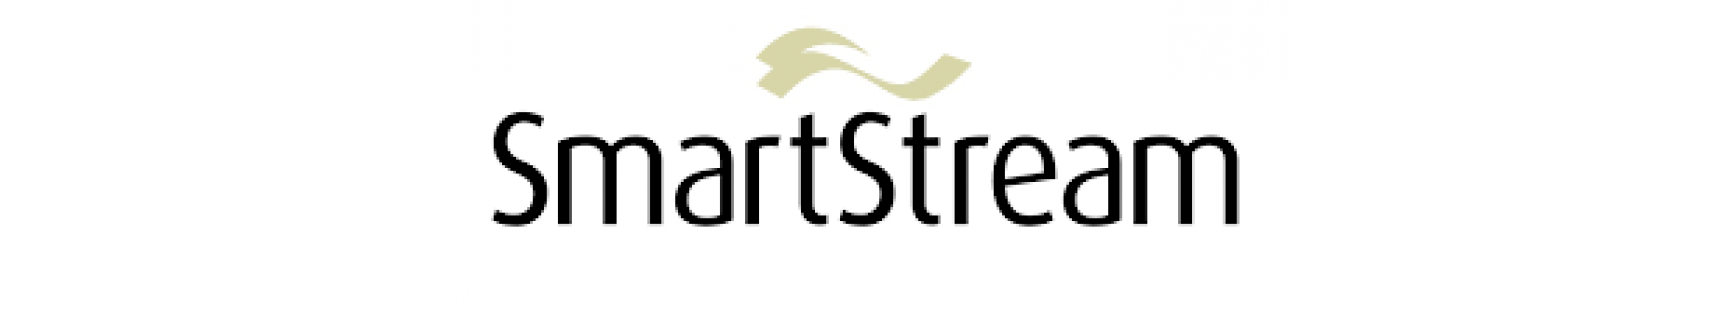 SmartStream Expand Global Footprint with its Latest Cloud-native AI Application 